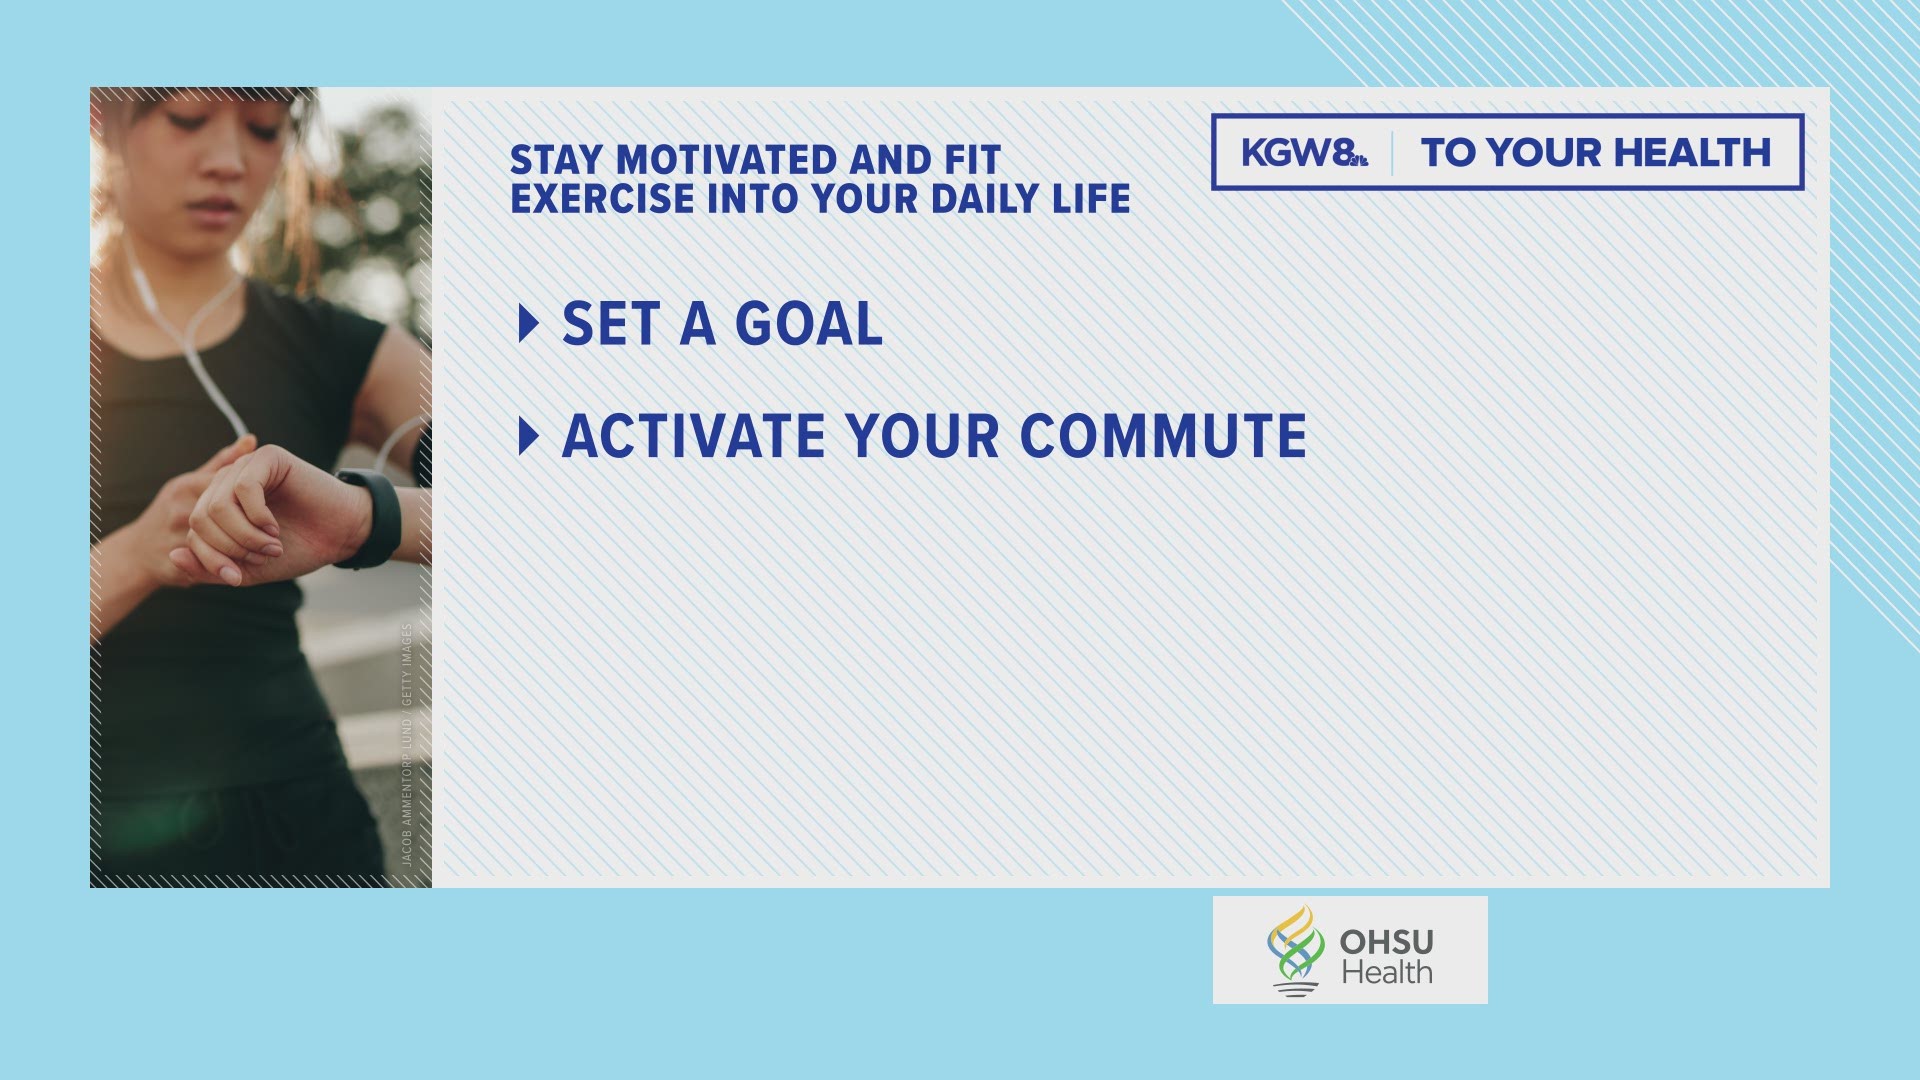 From OHSU Health, here are five tips to stay motivated and fit exercise into your daily life.